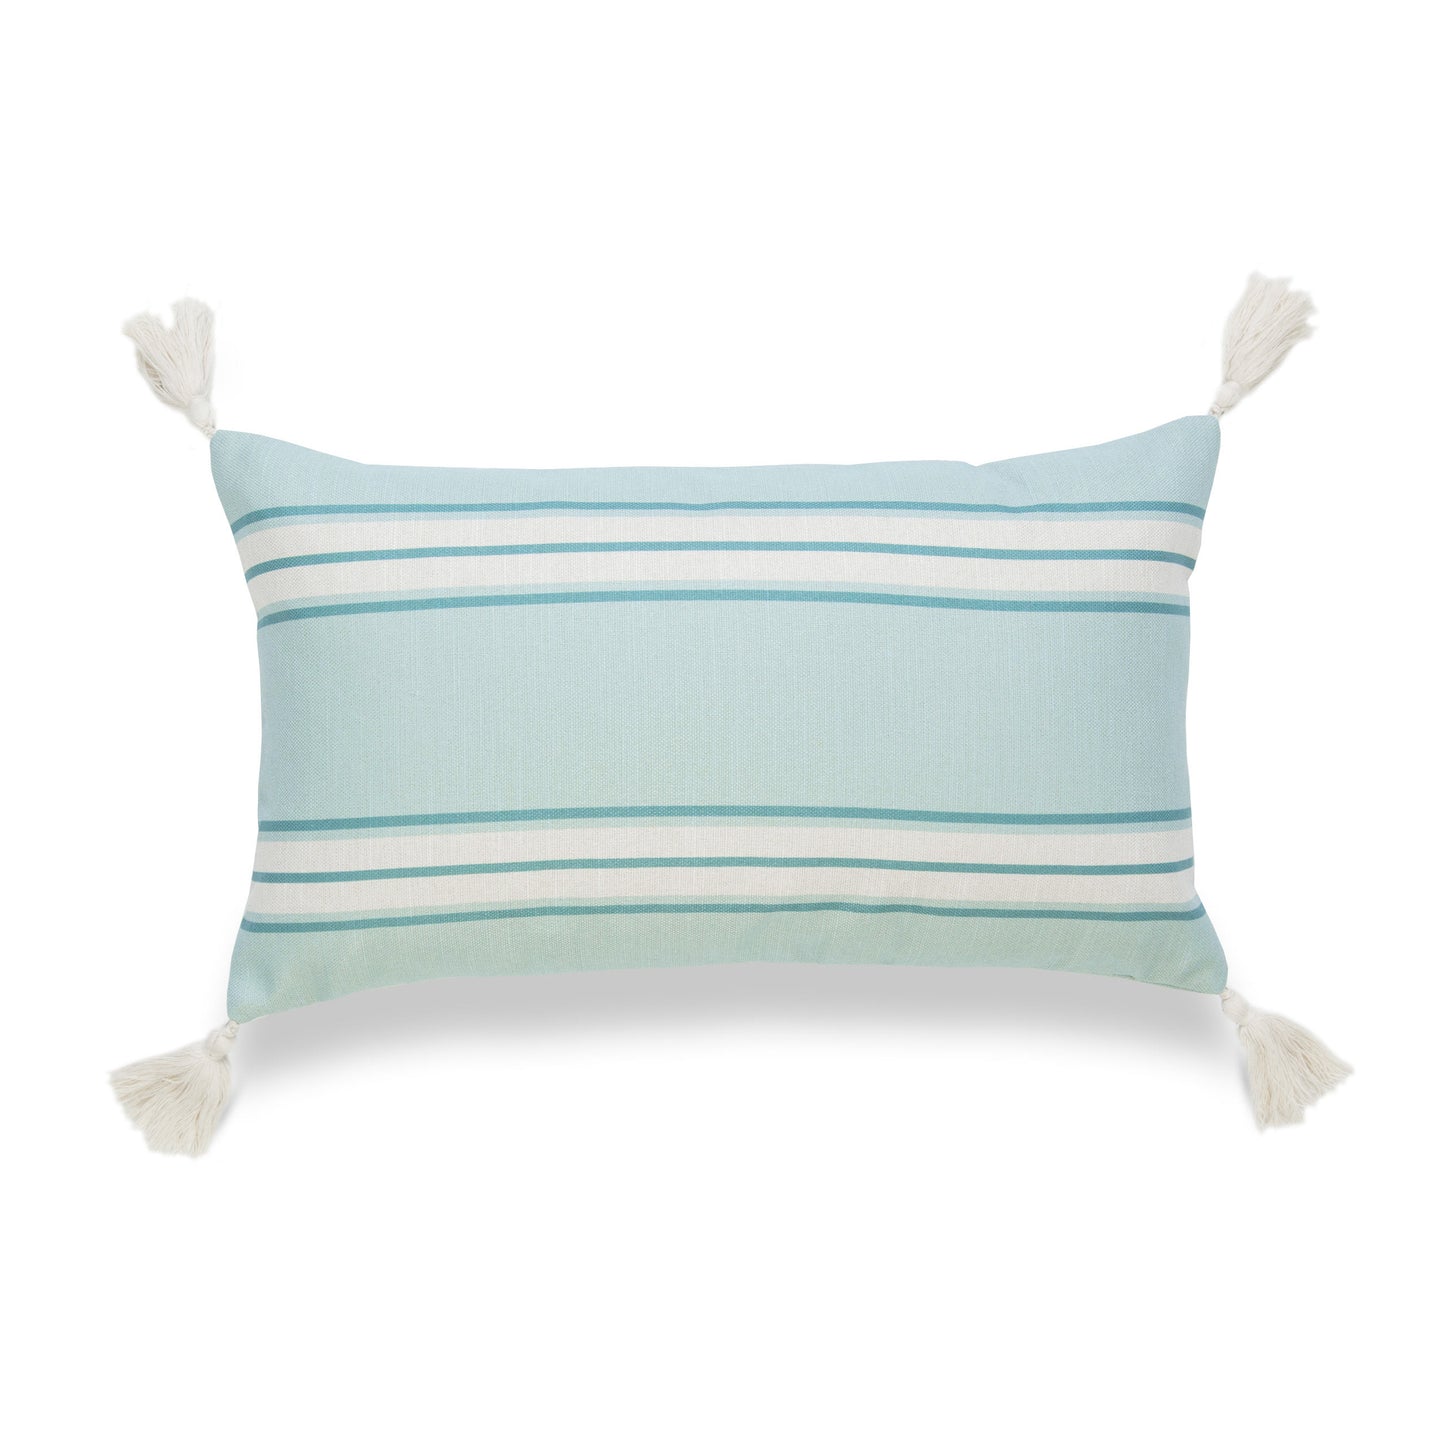 Sunnydaze Indoor/Outdoor Weather-Resistant Polyester Lumbar Decorative Pillow Cover Only with Zipper Closure - 12 inch x 20 inch - Beach Bound Stripe